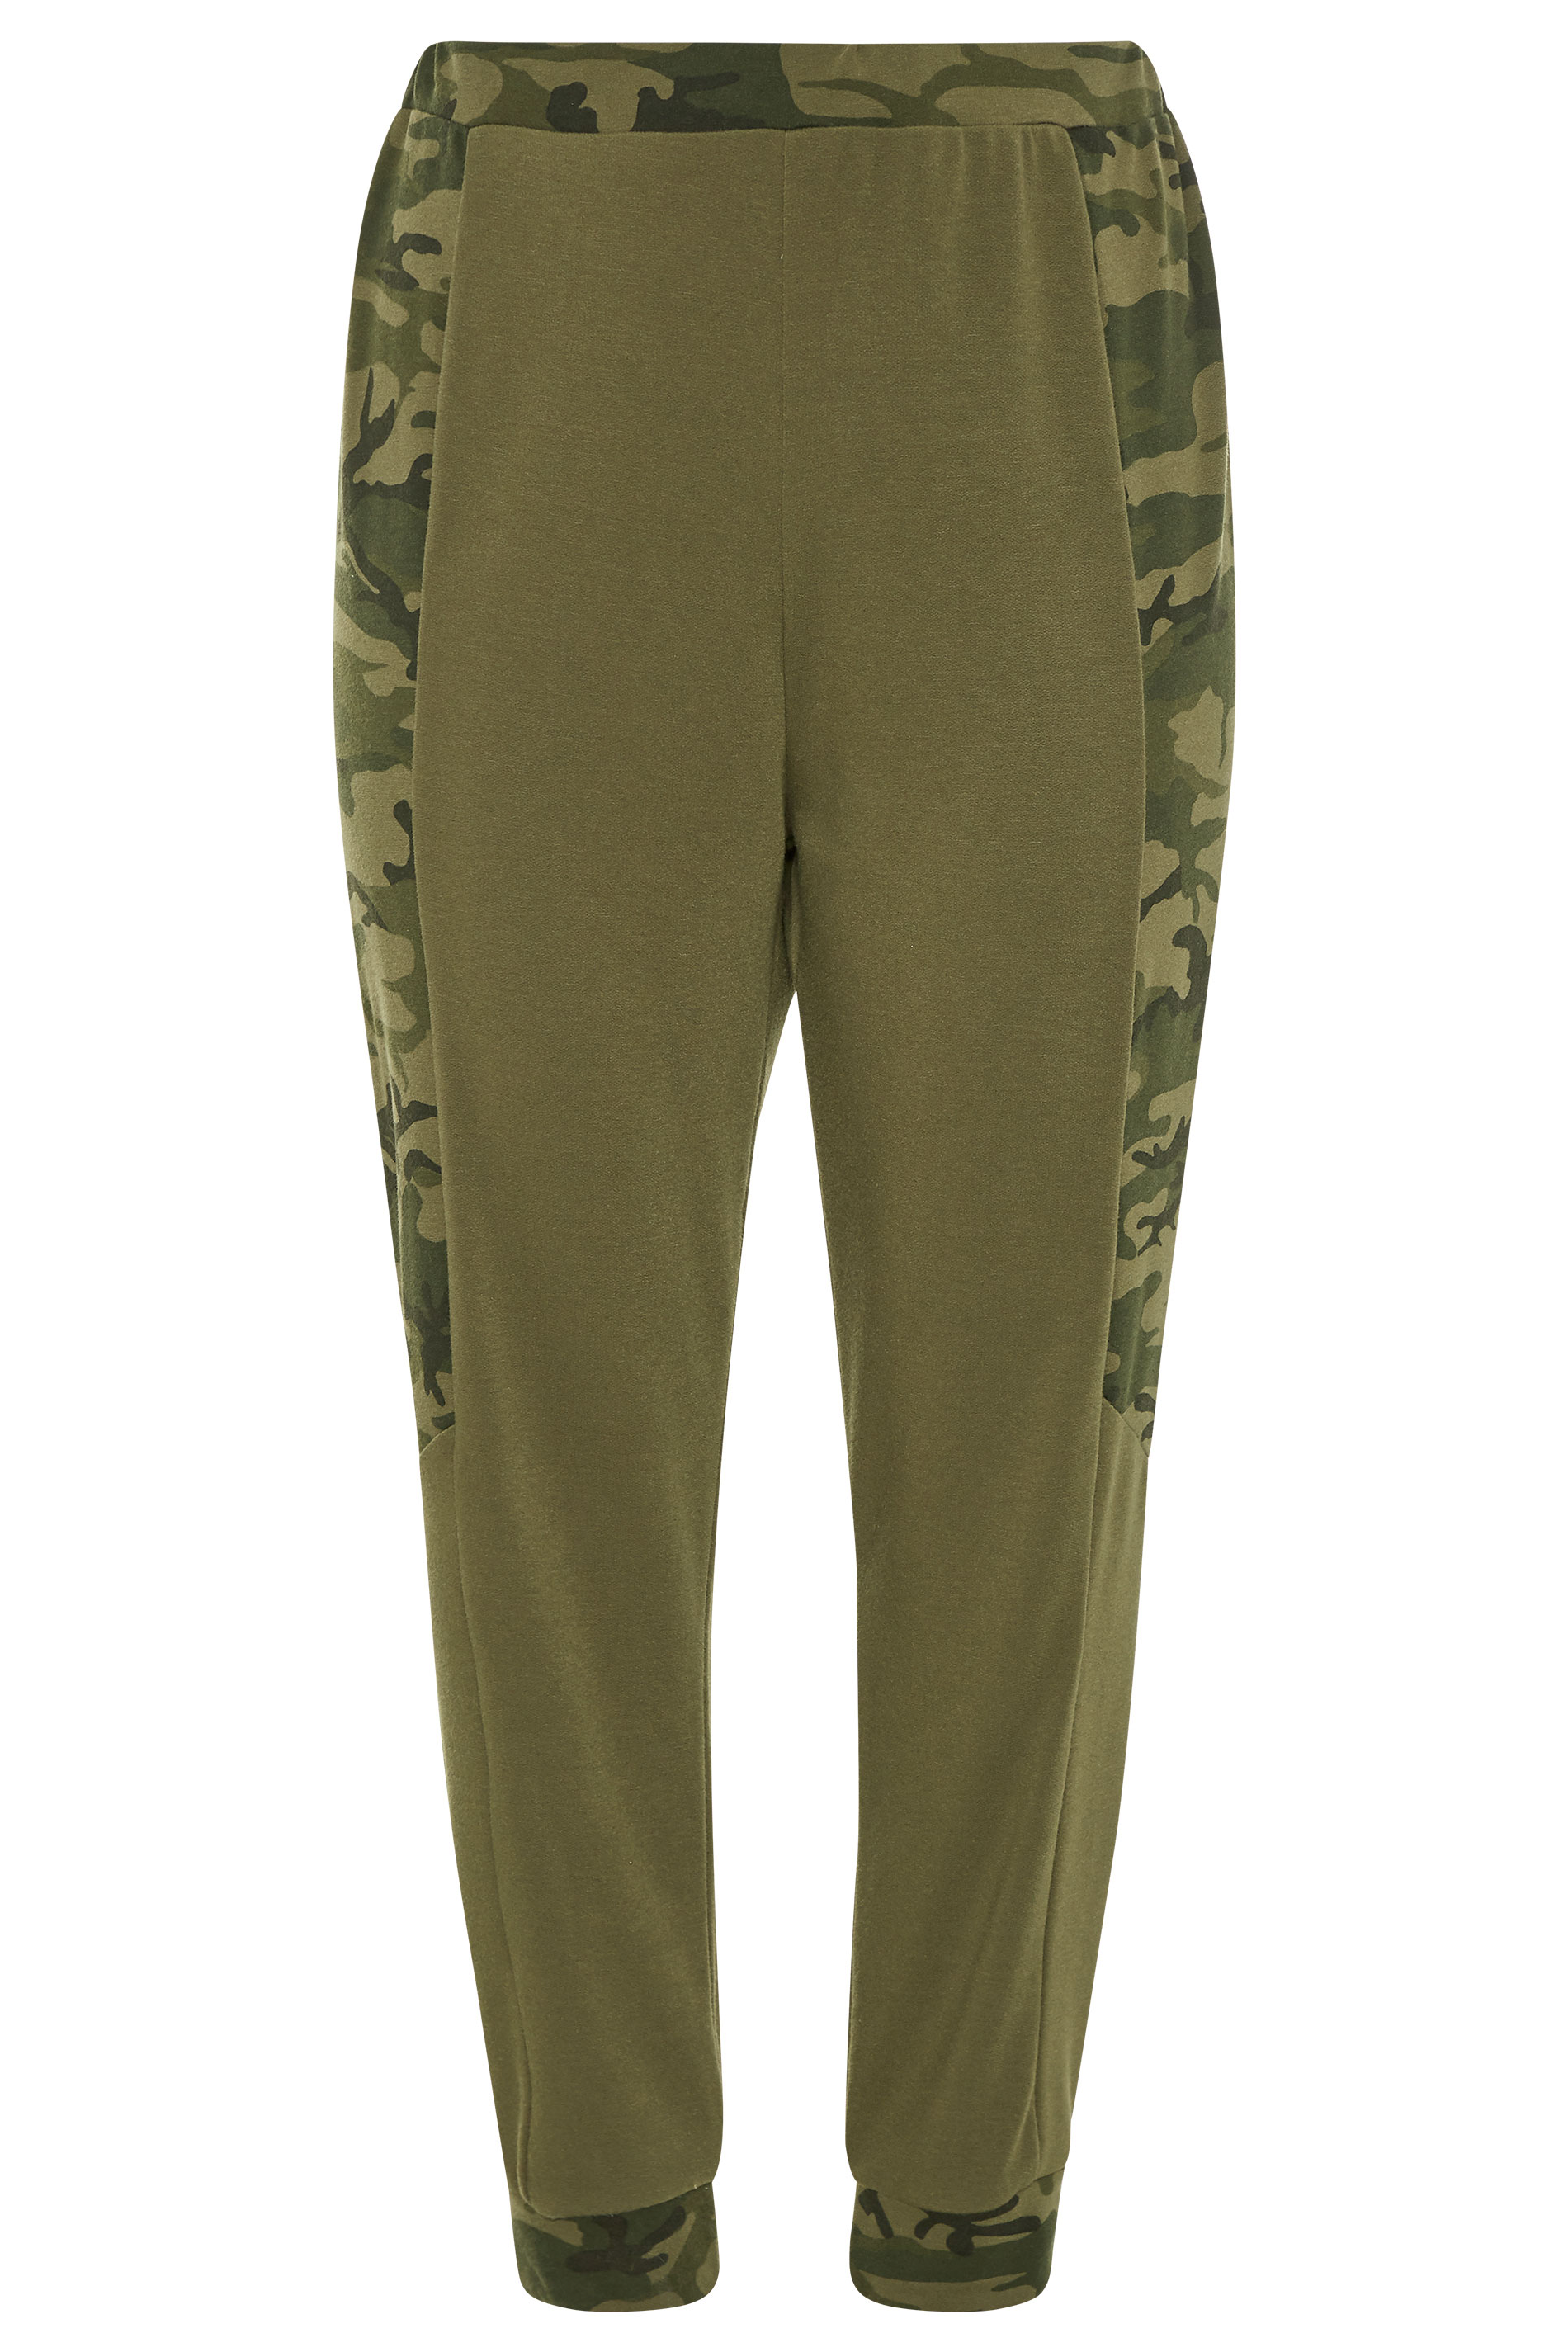 LIMITED COLLECTION Khaki Camo Colour Block Lounge Joggers | Yours Clothing